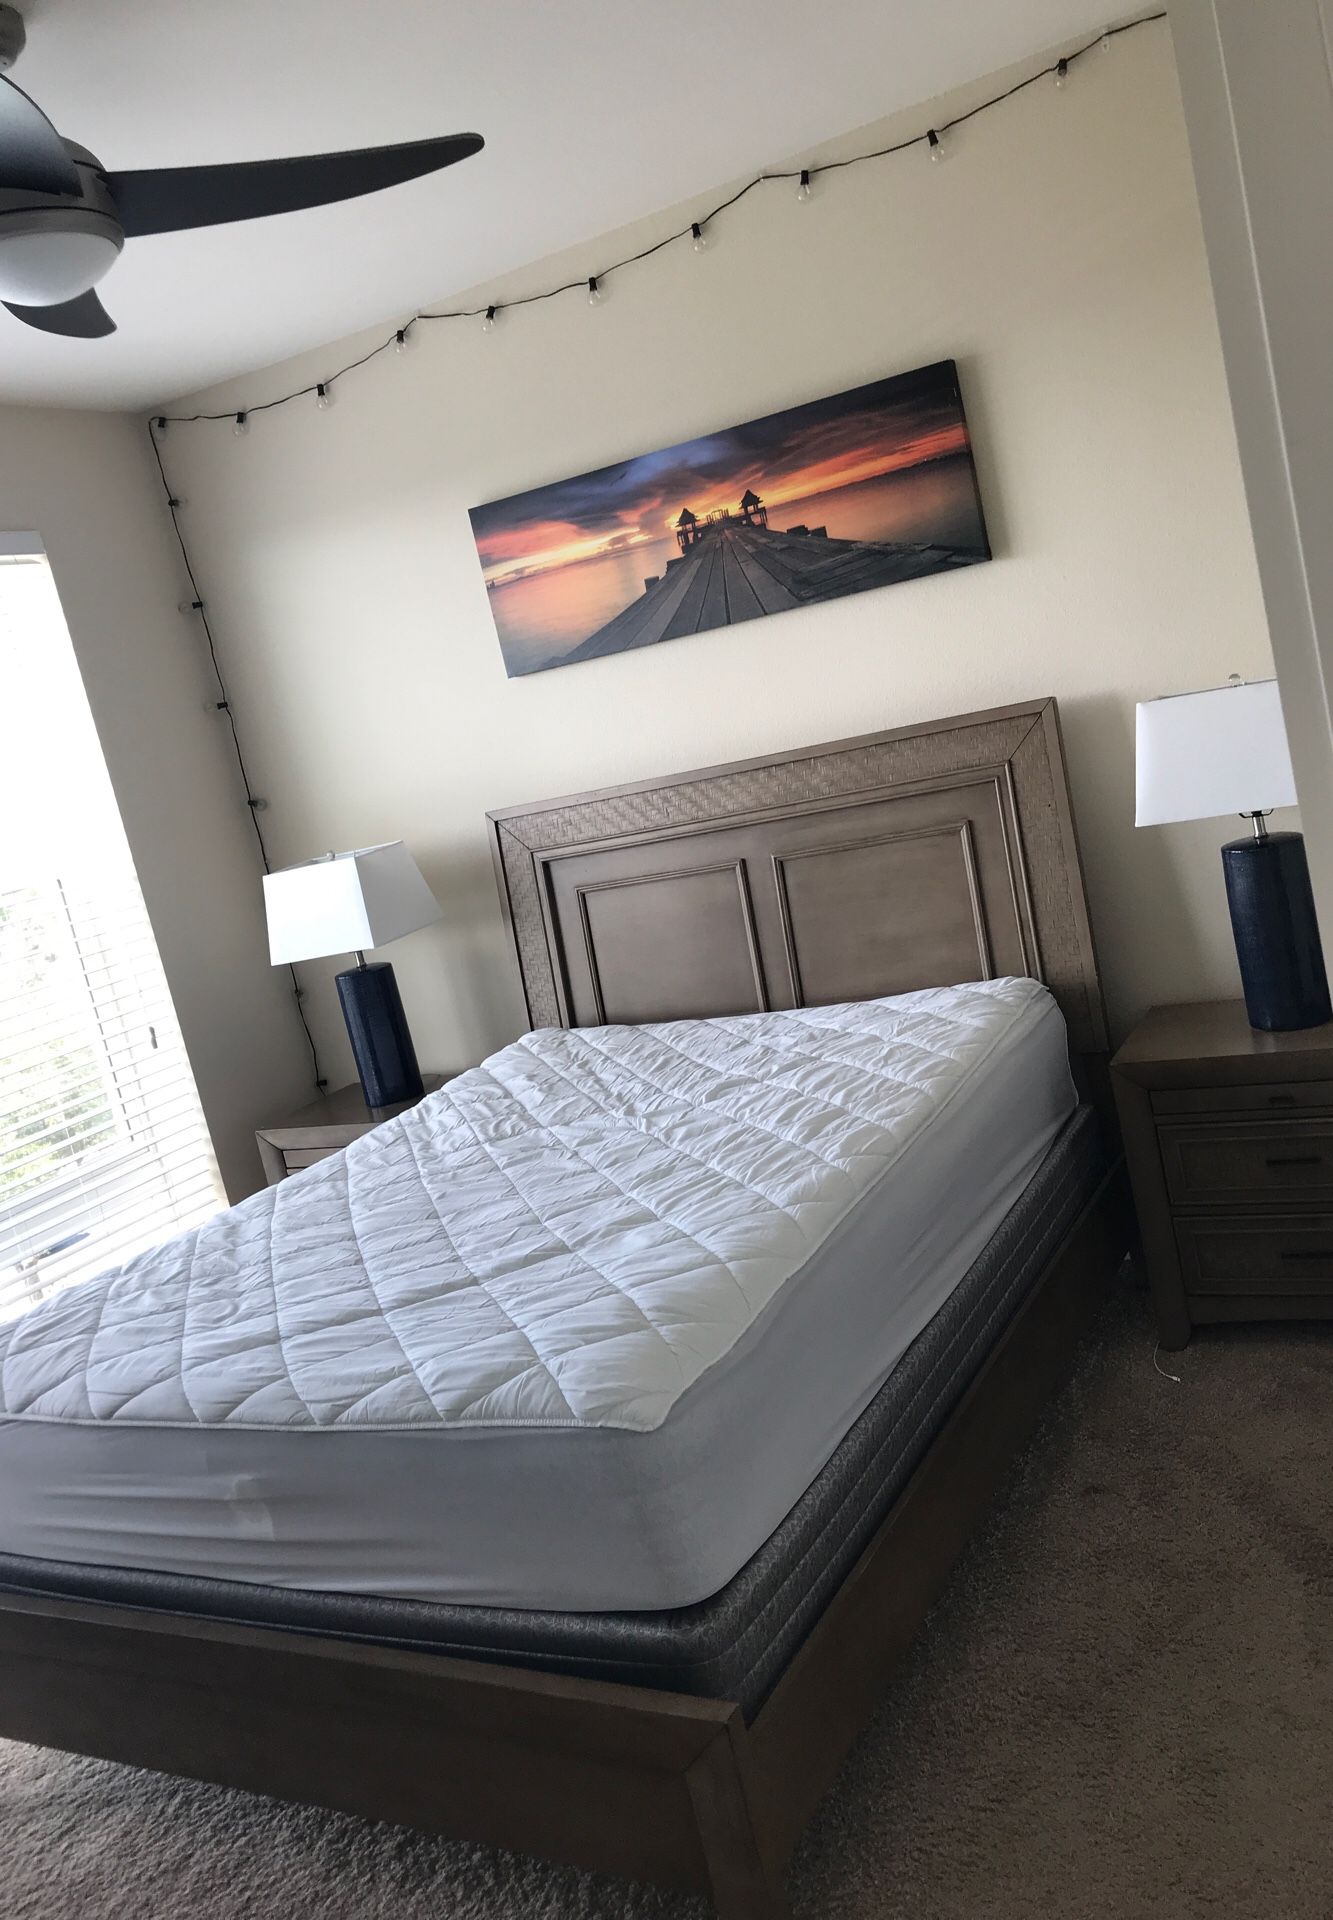 Full bedroom set - including mattress from Rooms-To-Go